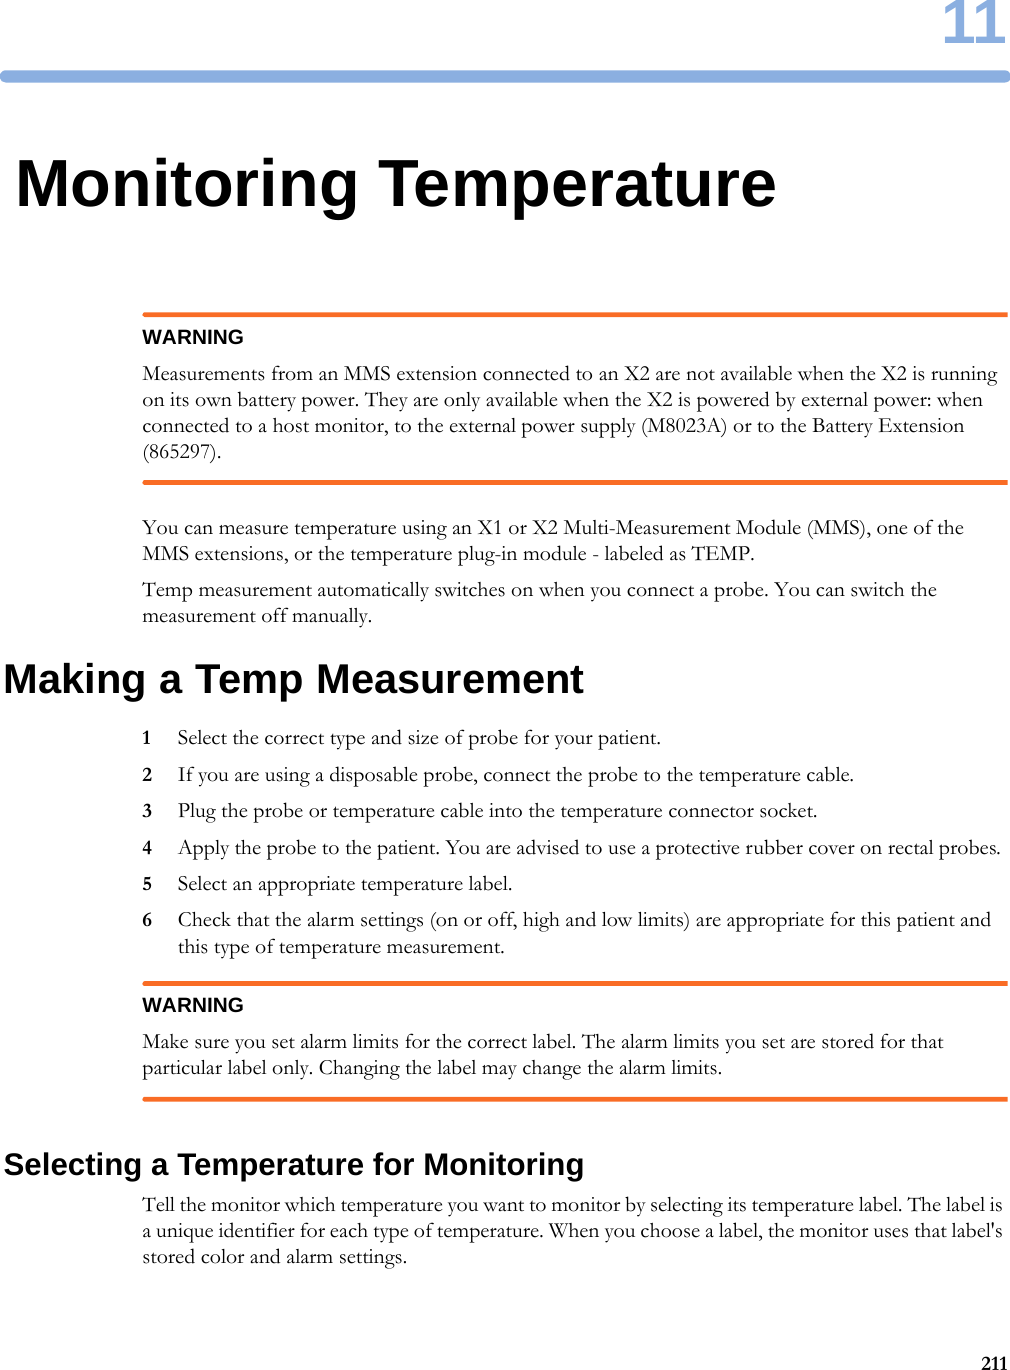 1121111Monitoring TemperatureWARNINGMeasurements from an MMS extension connected to an X2 are not available when the X2 is running on its own battery power. They are only available when the X2 is powered by external power: when connected to a host monitor, to the external power supply (M8023A) or to the Battery Extension (865297).You can measure temperature using an X1 or X2 Multi-Measurement Module (MMS), one of the MMS extensions, or the temperature plug-in module - labeled as TEMP.Temp measurement automatically switches on when you connect a probe. You can switch the measurement off manually.Making a Temp Measurement1Select the correct type and size of probe for your patient.2If you are using a disposable probe, connect the probe to the temperature cable.3Plug the probe or temperature cable into the temperature connector socket.4Apply the probe to the patient. You are advised to use a protective rubber cover on rectal probes.5Select an appropriate temperature label.6Check that the alarm settings (on or off, high and low limits) are appropriate for this patient and this type of temperature measurement.WARNINGMake sure you set alarm limits for the correct label. The alarm limits you set are stored for that particular label only. Changing the label may change the alarm limits.Selecting a Temperature for MonitoringTell the monitor which temperature you want to monitor by selecting its temperature label. The label is a unique identifier for each type of temperature. When you choose a label, the monitor uses that label&apos;s stored color and alarm settings.